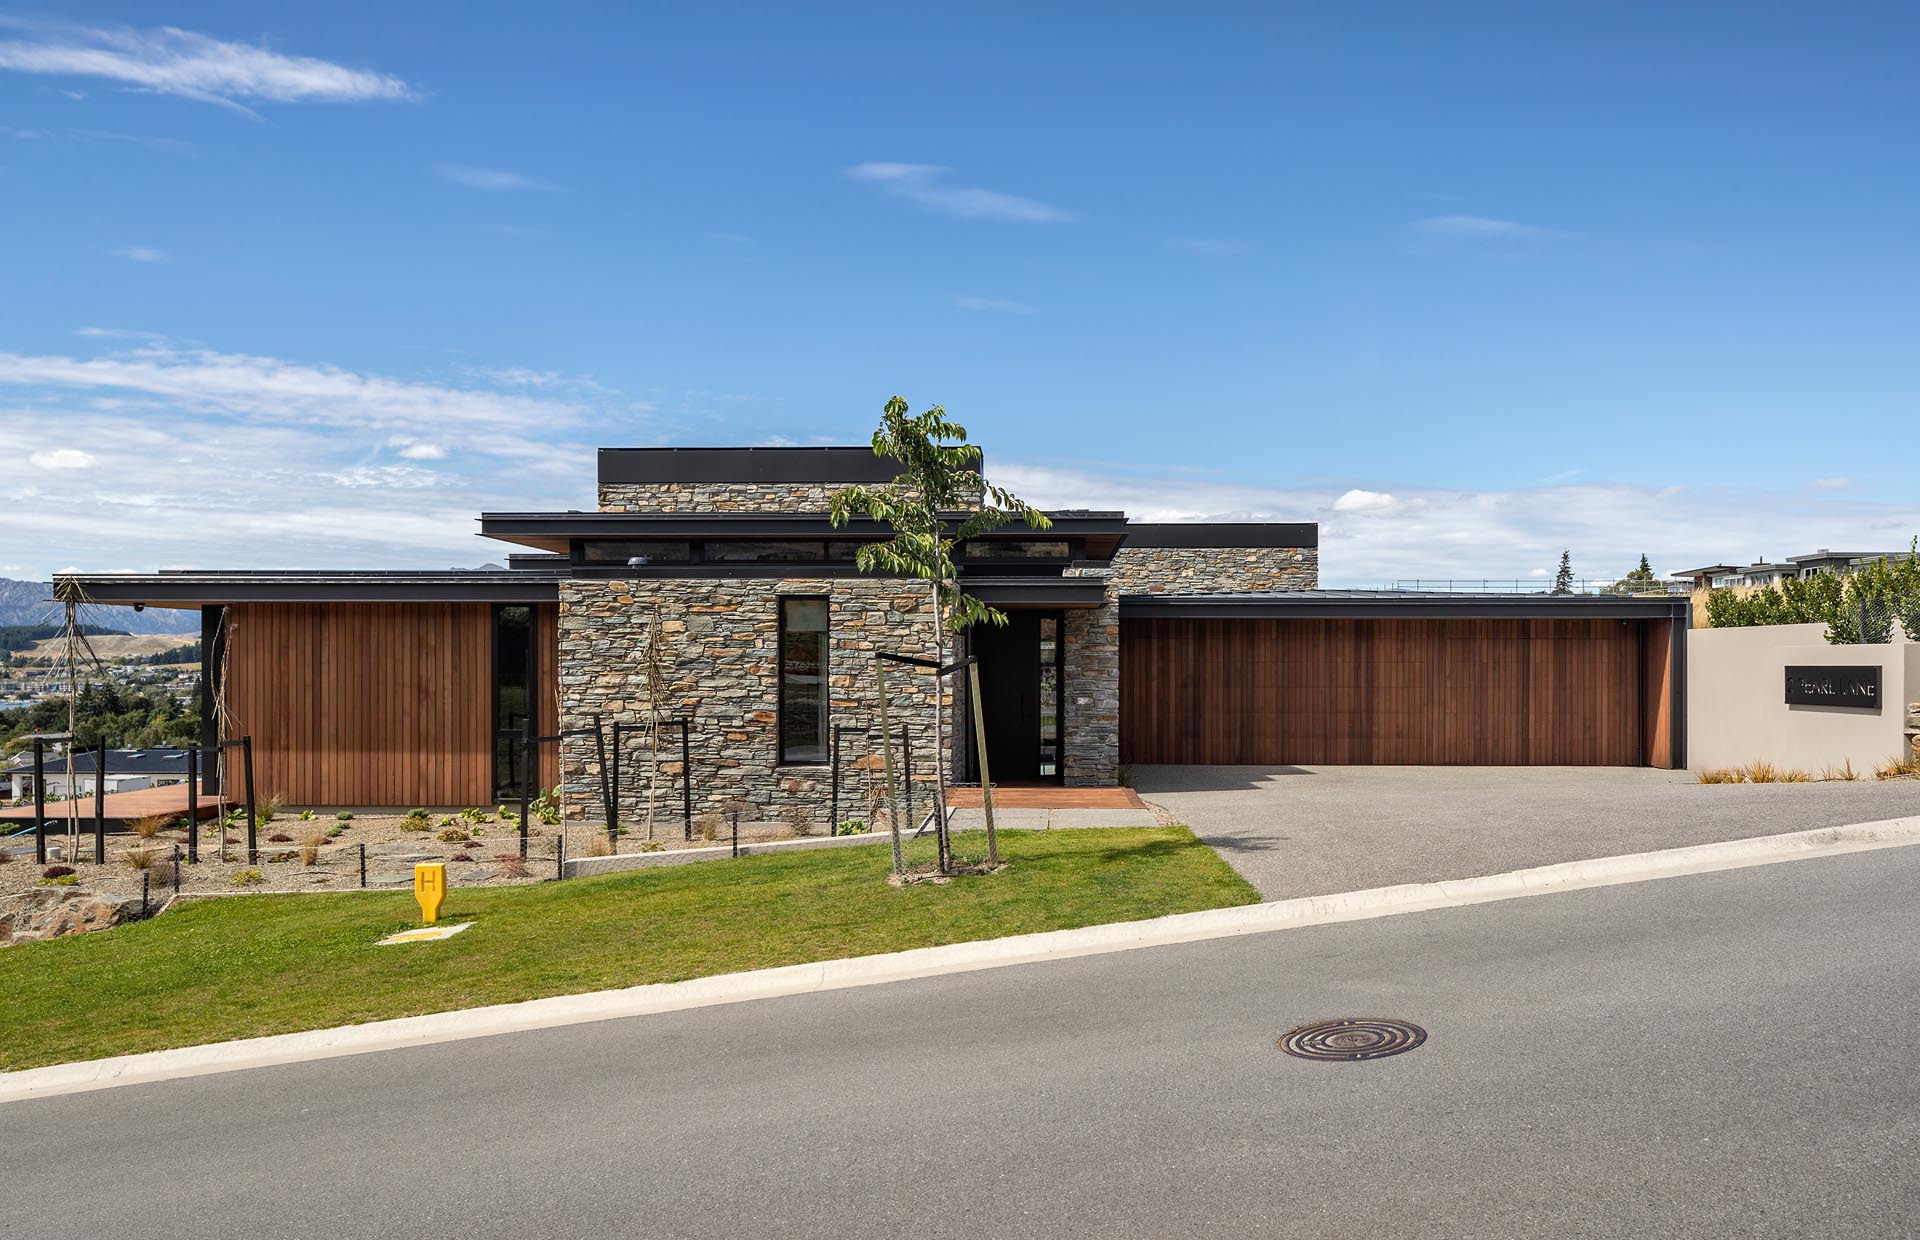 Using a palette of schist, metals and cedar, with exposed structural steel fascias to add a touch of grit, this modern house appears in keeping with the alpine and rural landscapes of the area.